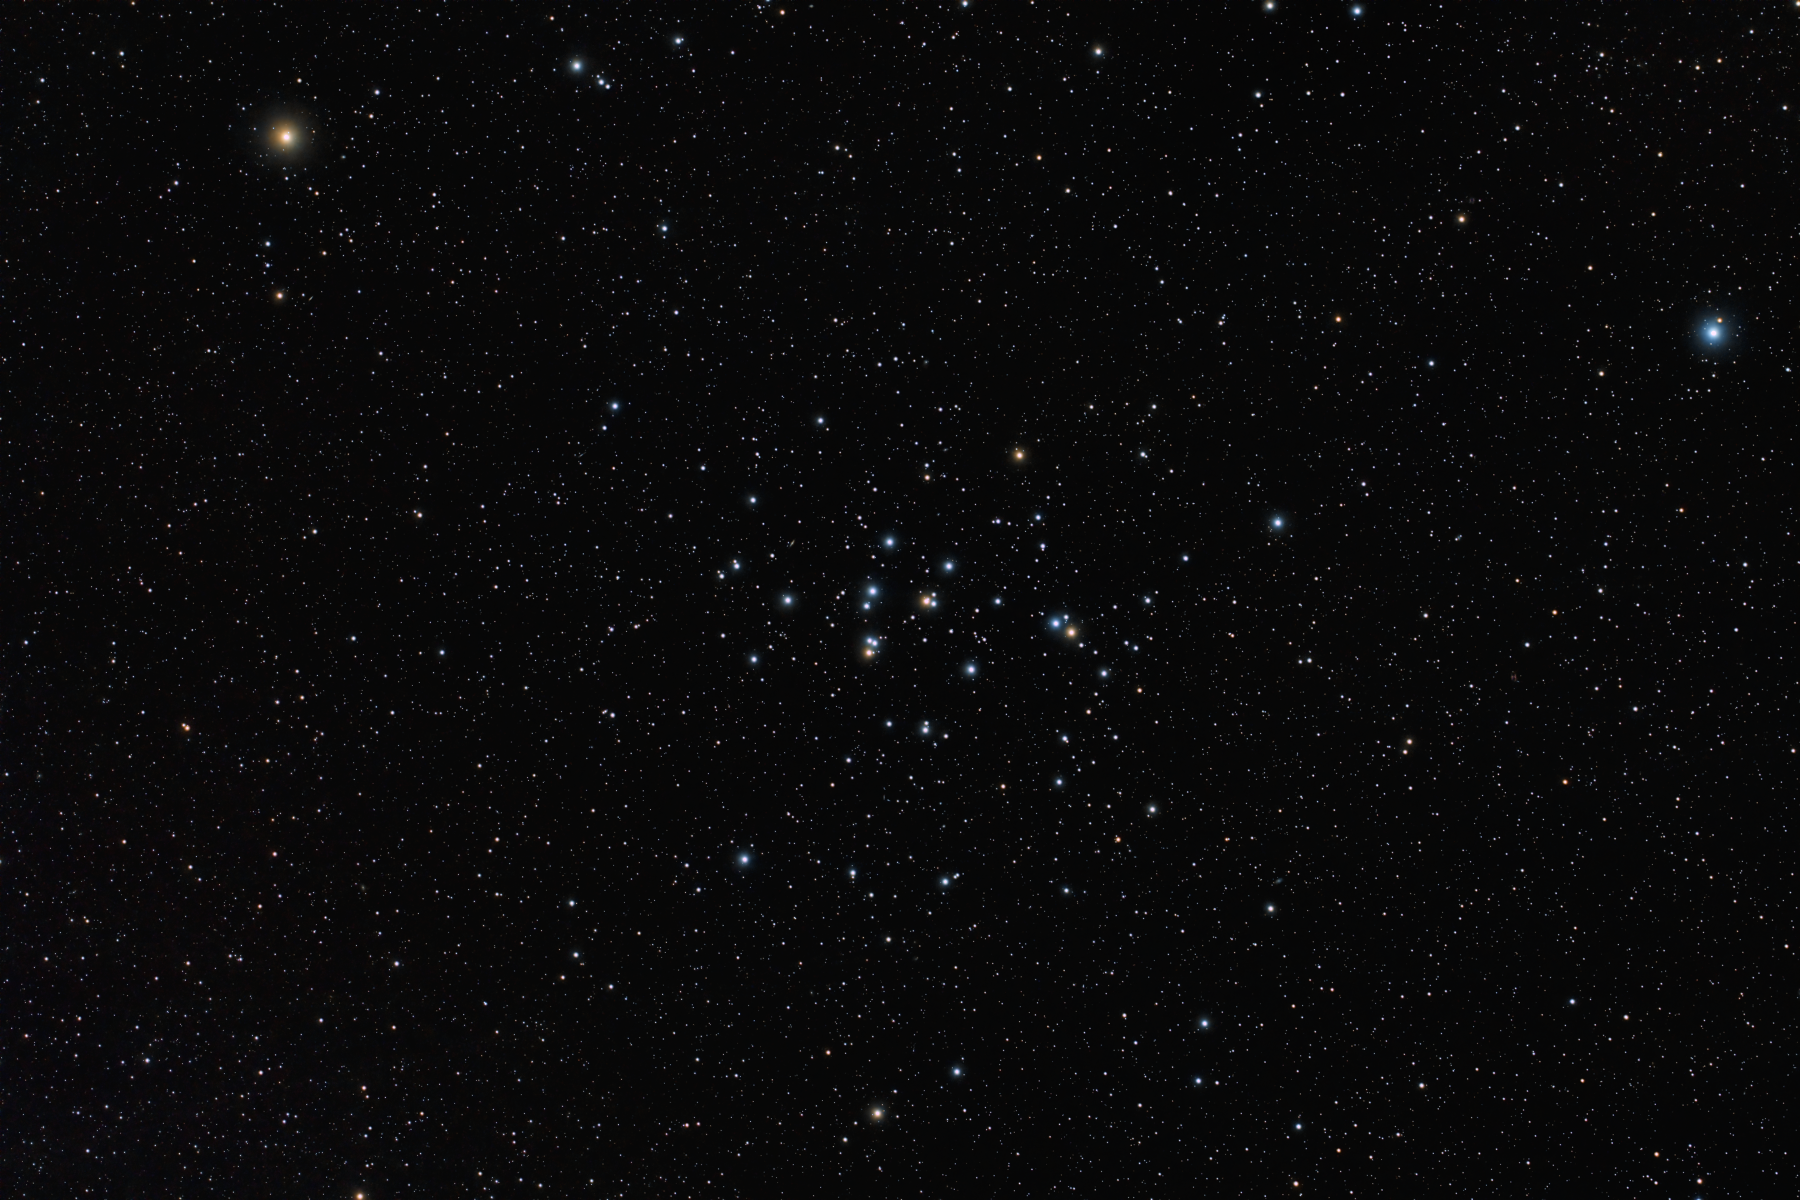 M44, Beehive Cluster